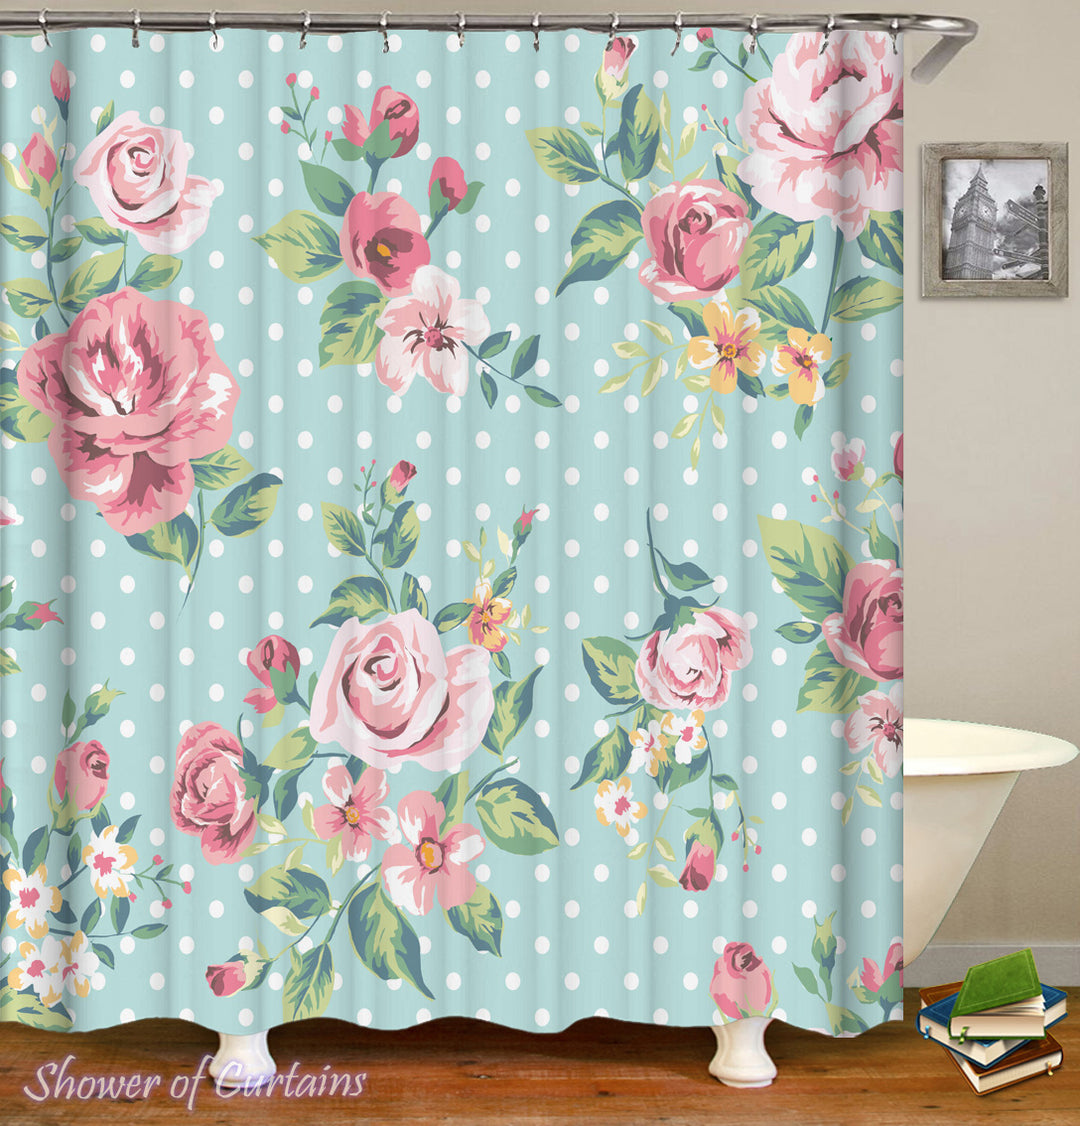 Floral Shower Curtain of Classic Floral Over Polka Dots